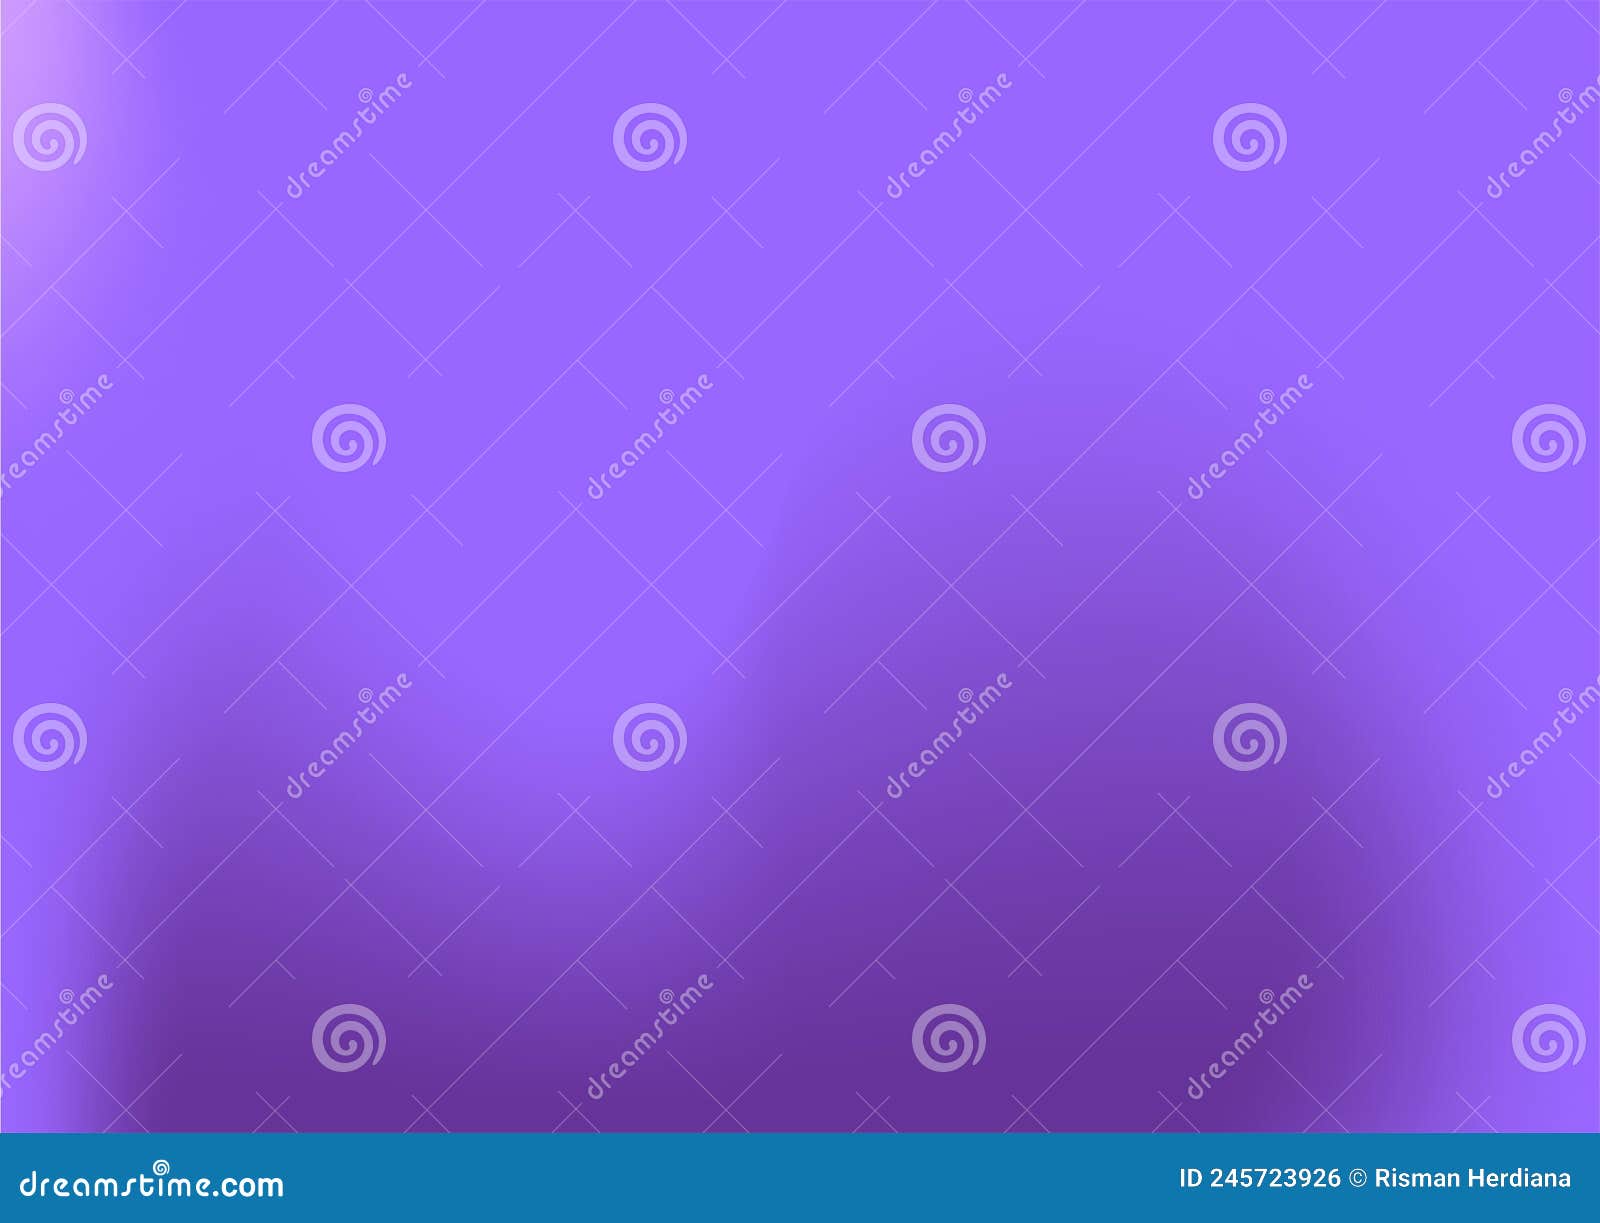 Gradient purple color image, A4 size, very suitable for covers, banners, easy to edit